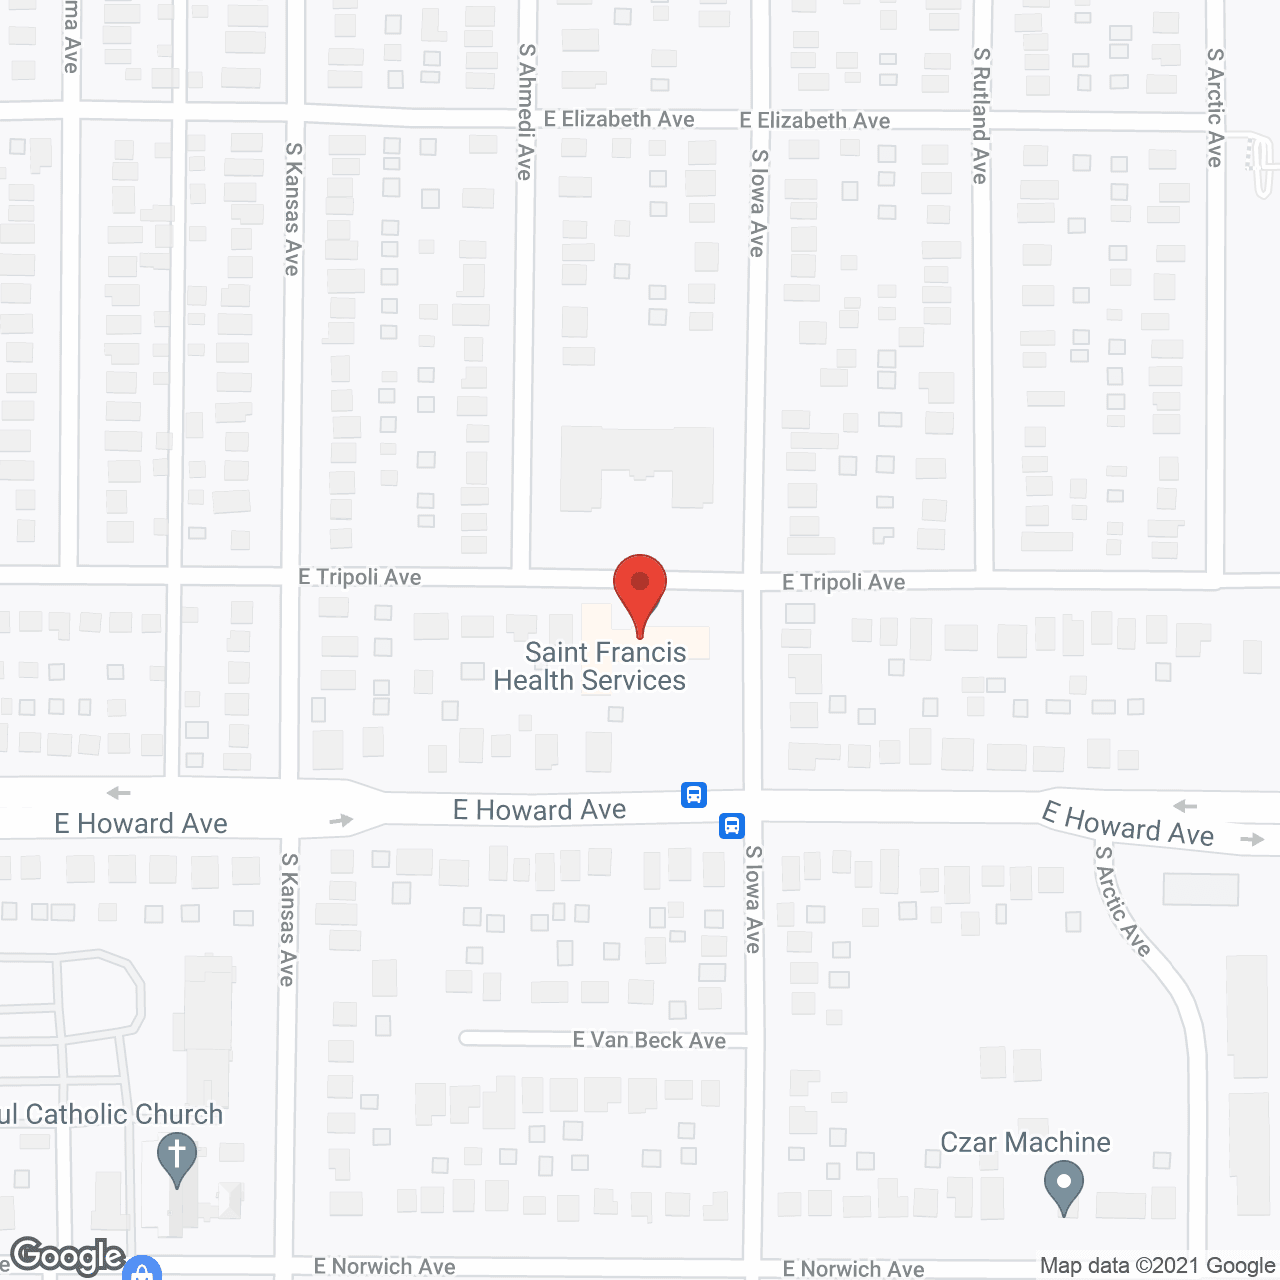 St. Francis House Services in google map